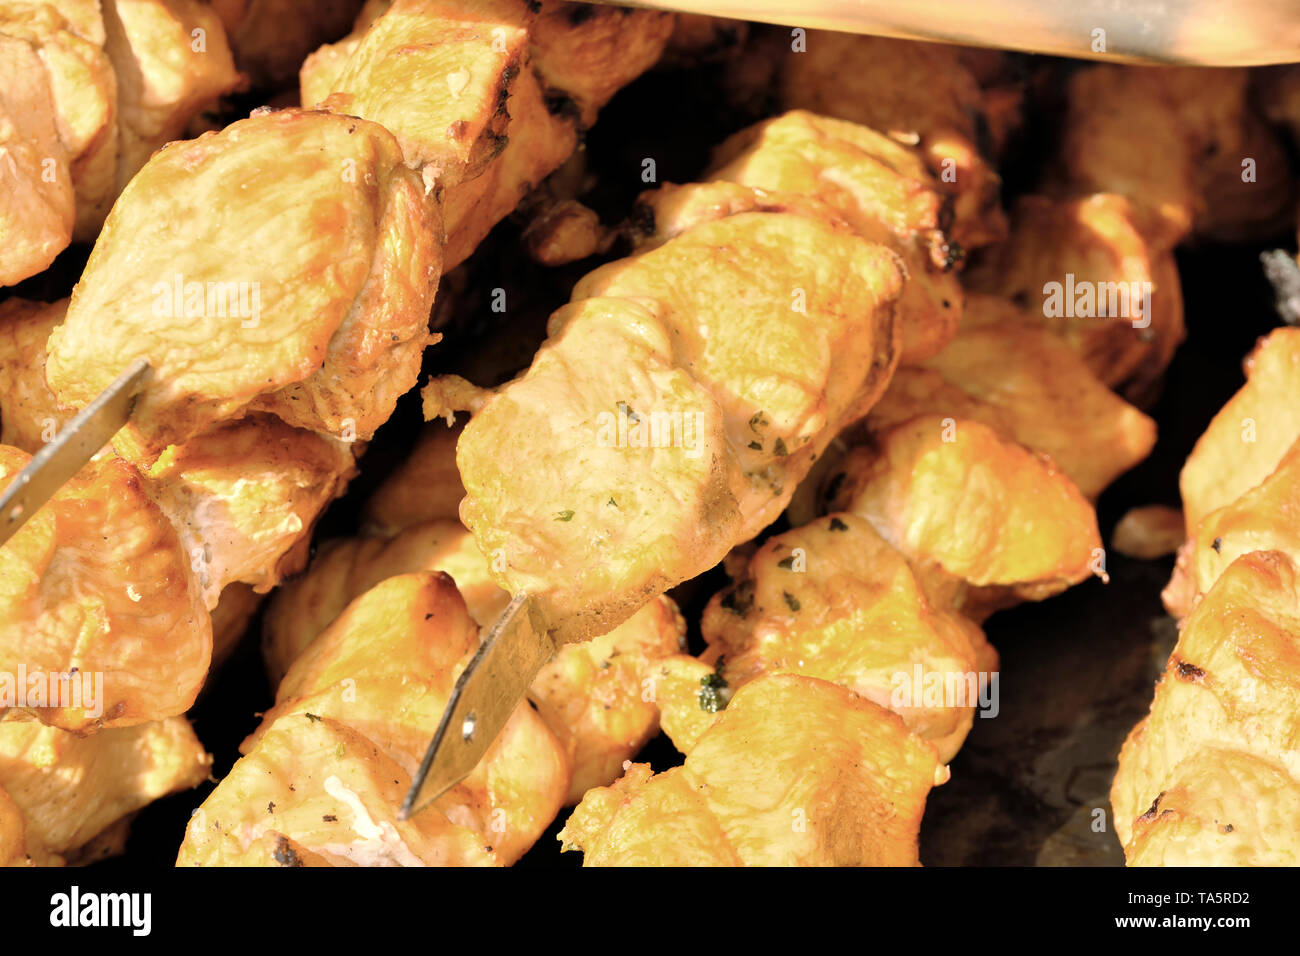 Meat on a skewer is grilled on a picnic closeup Stock Photo